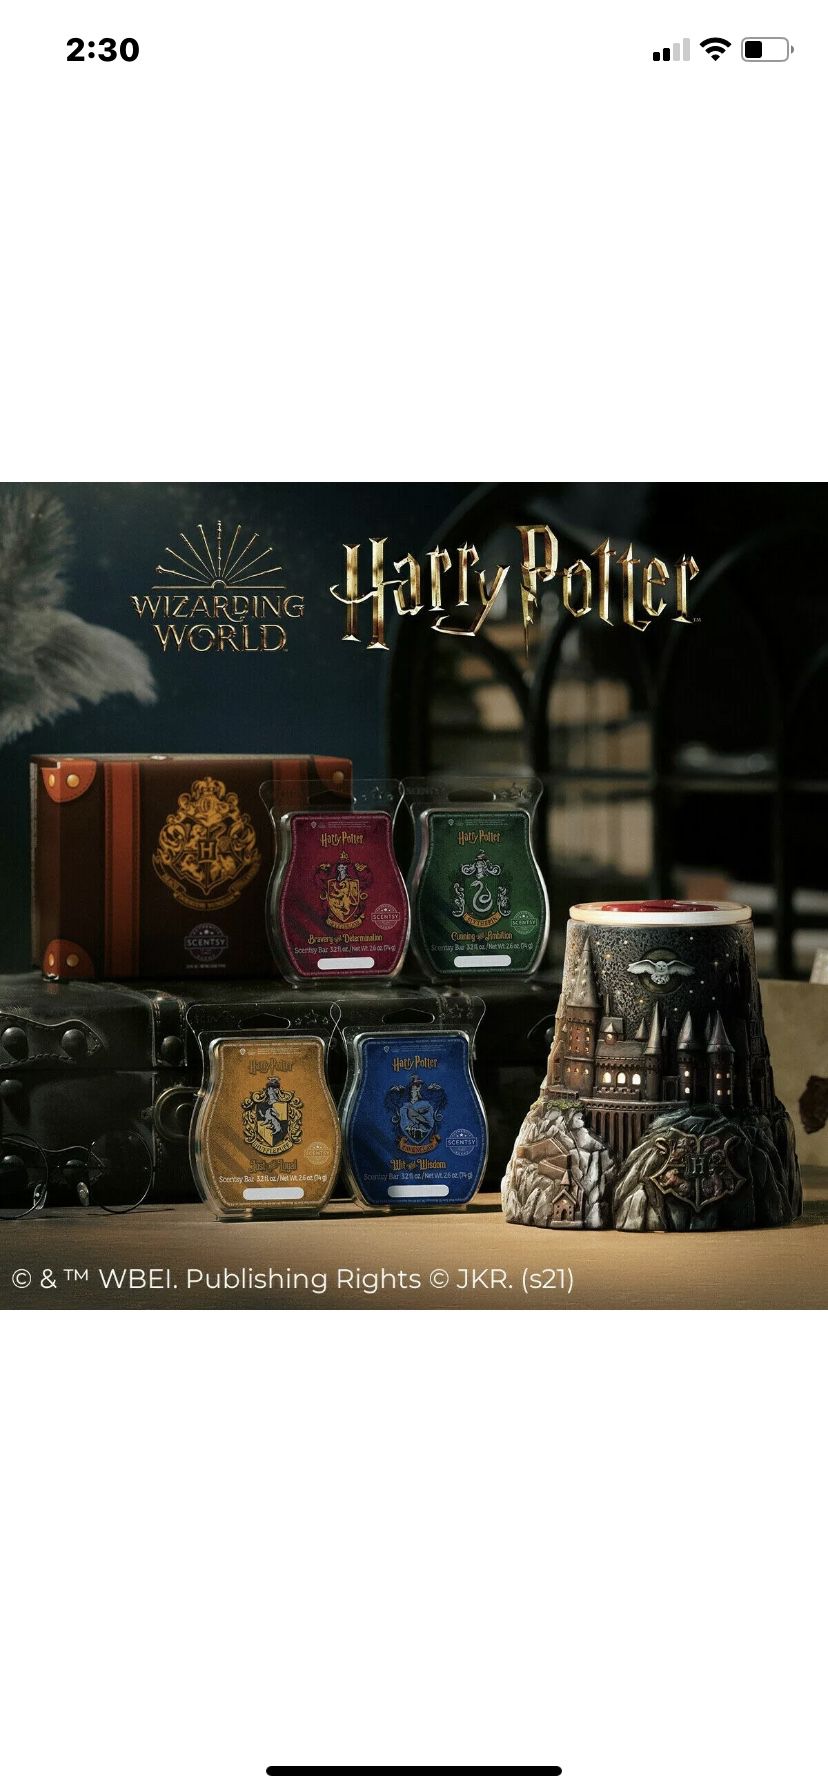 HARRY POTTER HOGWARTS SCENTSY WARMER & HOGWARTS HOUSES WAX COLLECTION BRAND NEW 